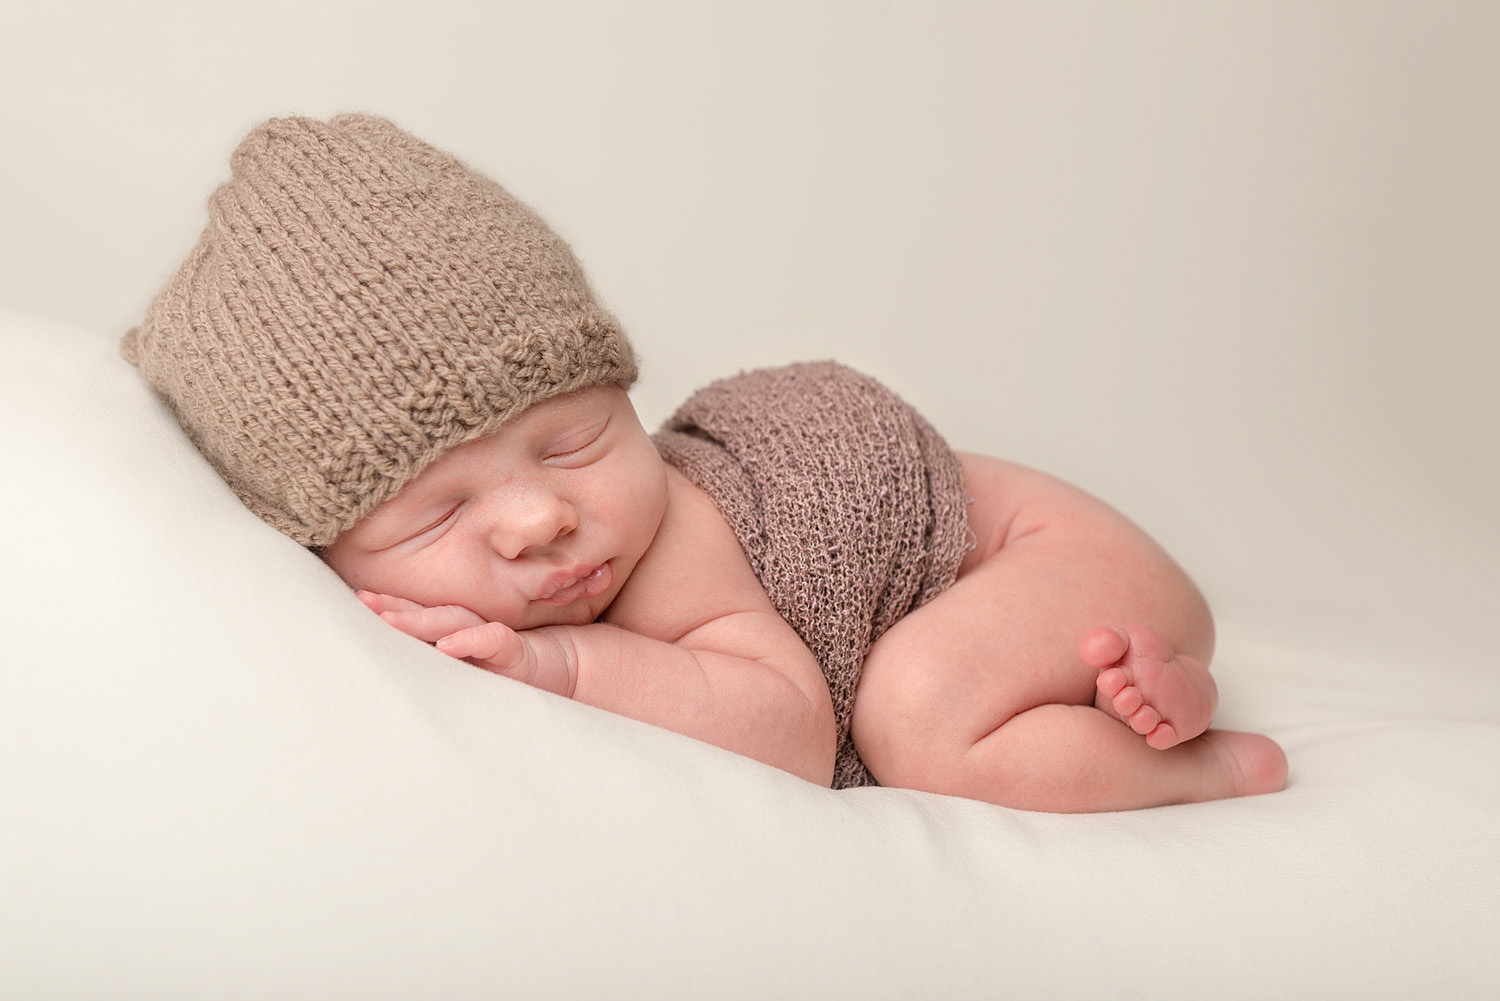 When is the best time to have newborn photos taken?